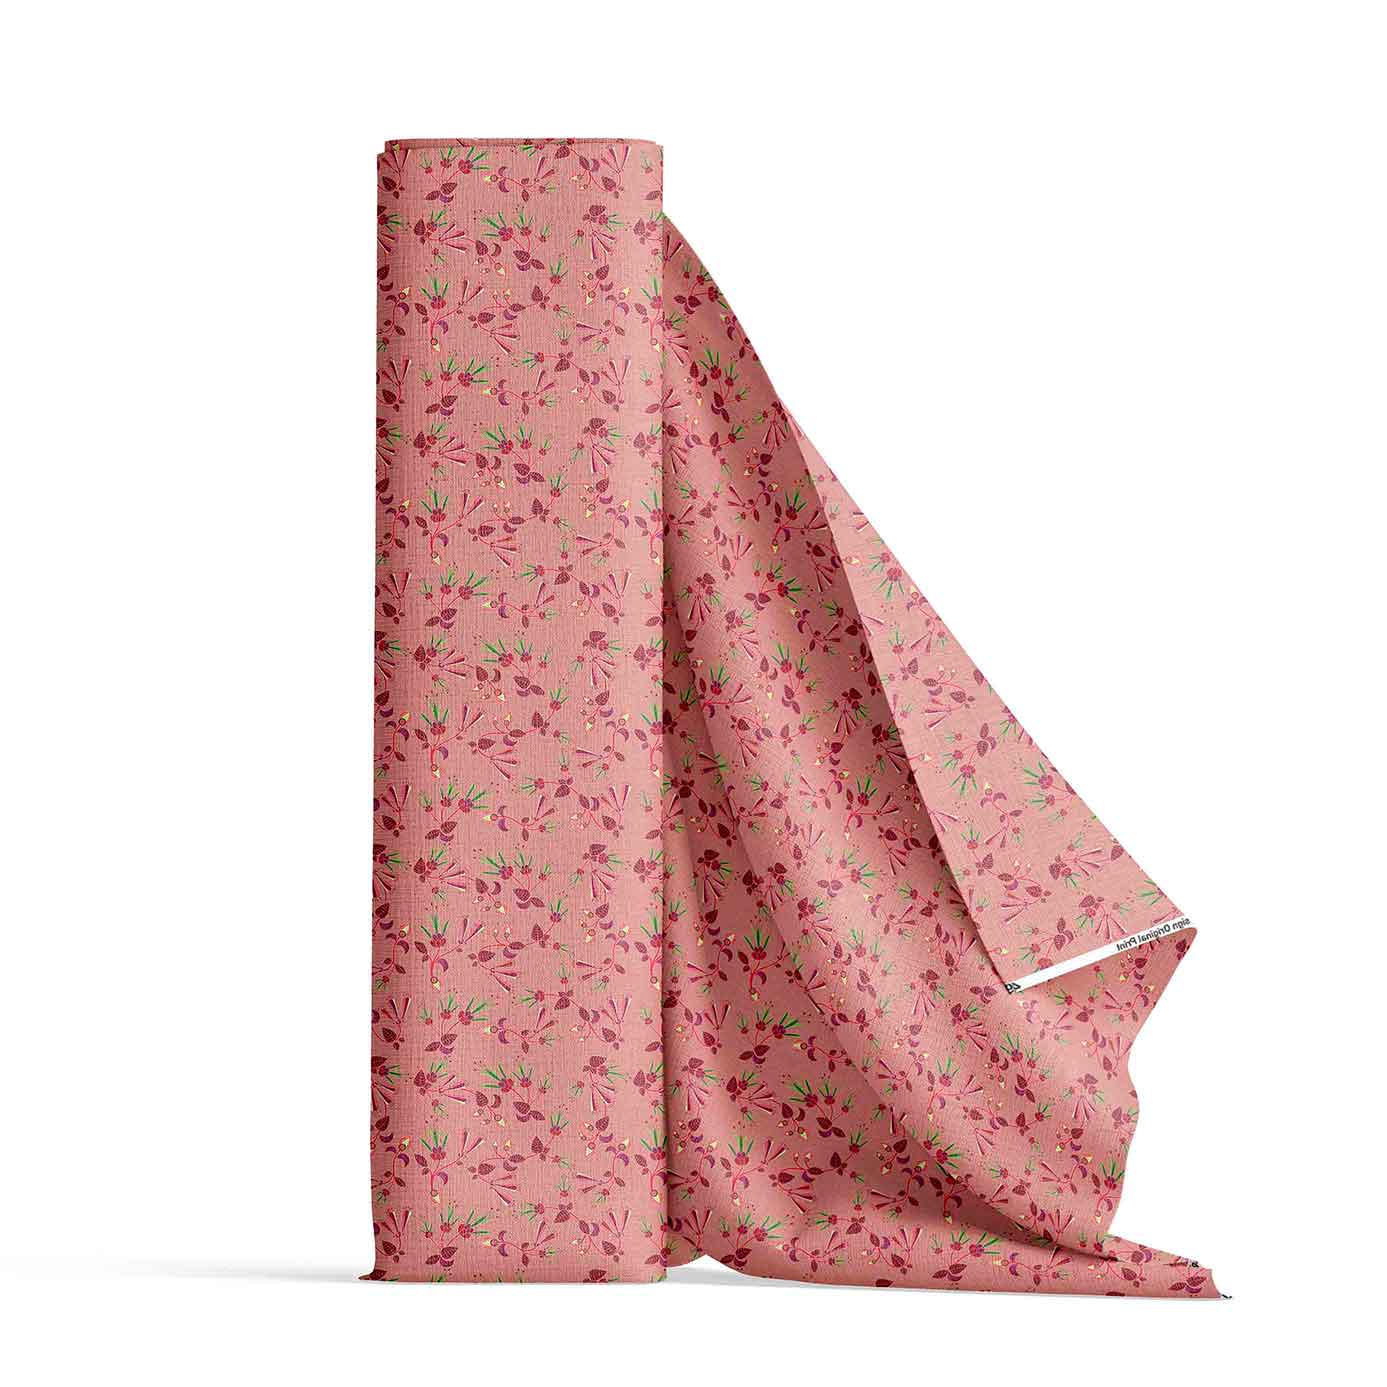 Swift Floral Peach Rouge Remix Satin Fabric By the Yard Pre Order